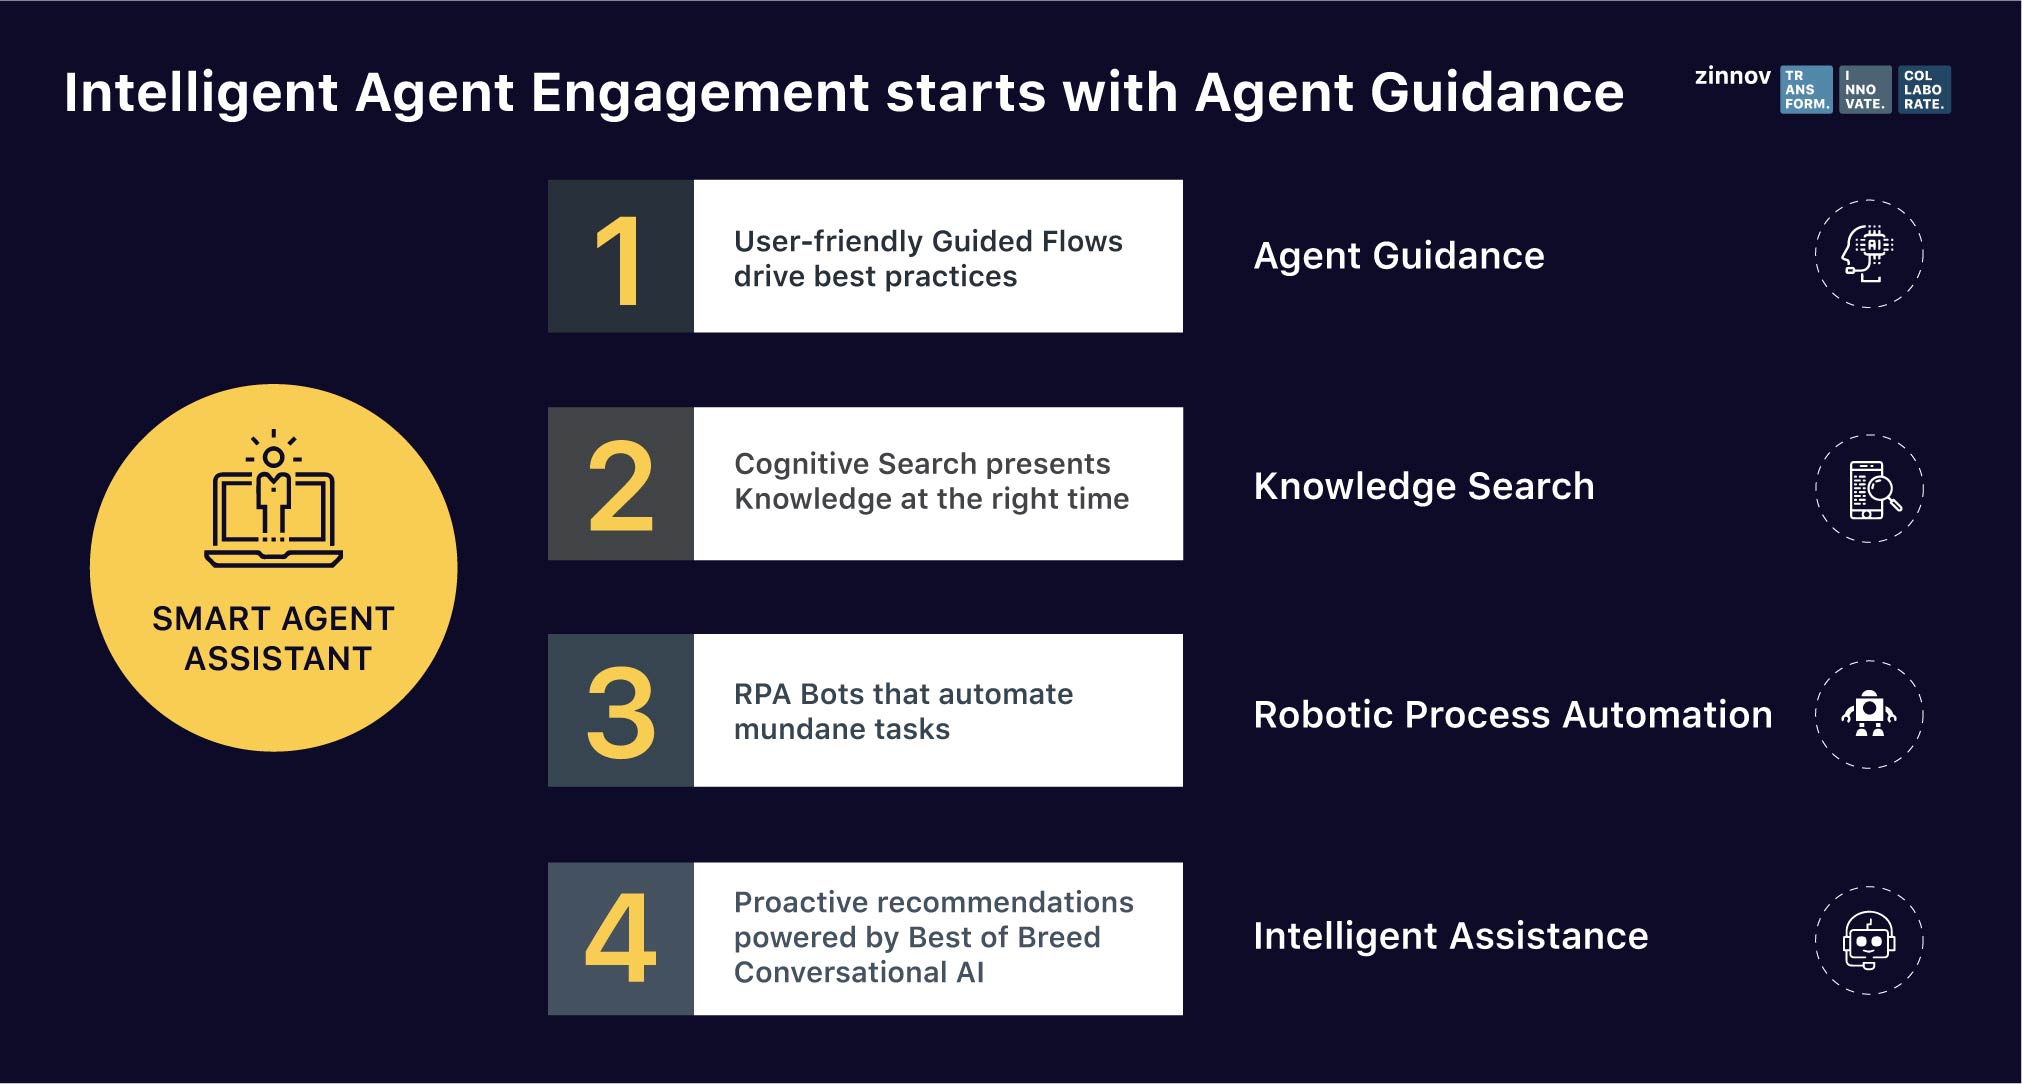 Intelligent Engagement starts with Agent Guidance